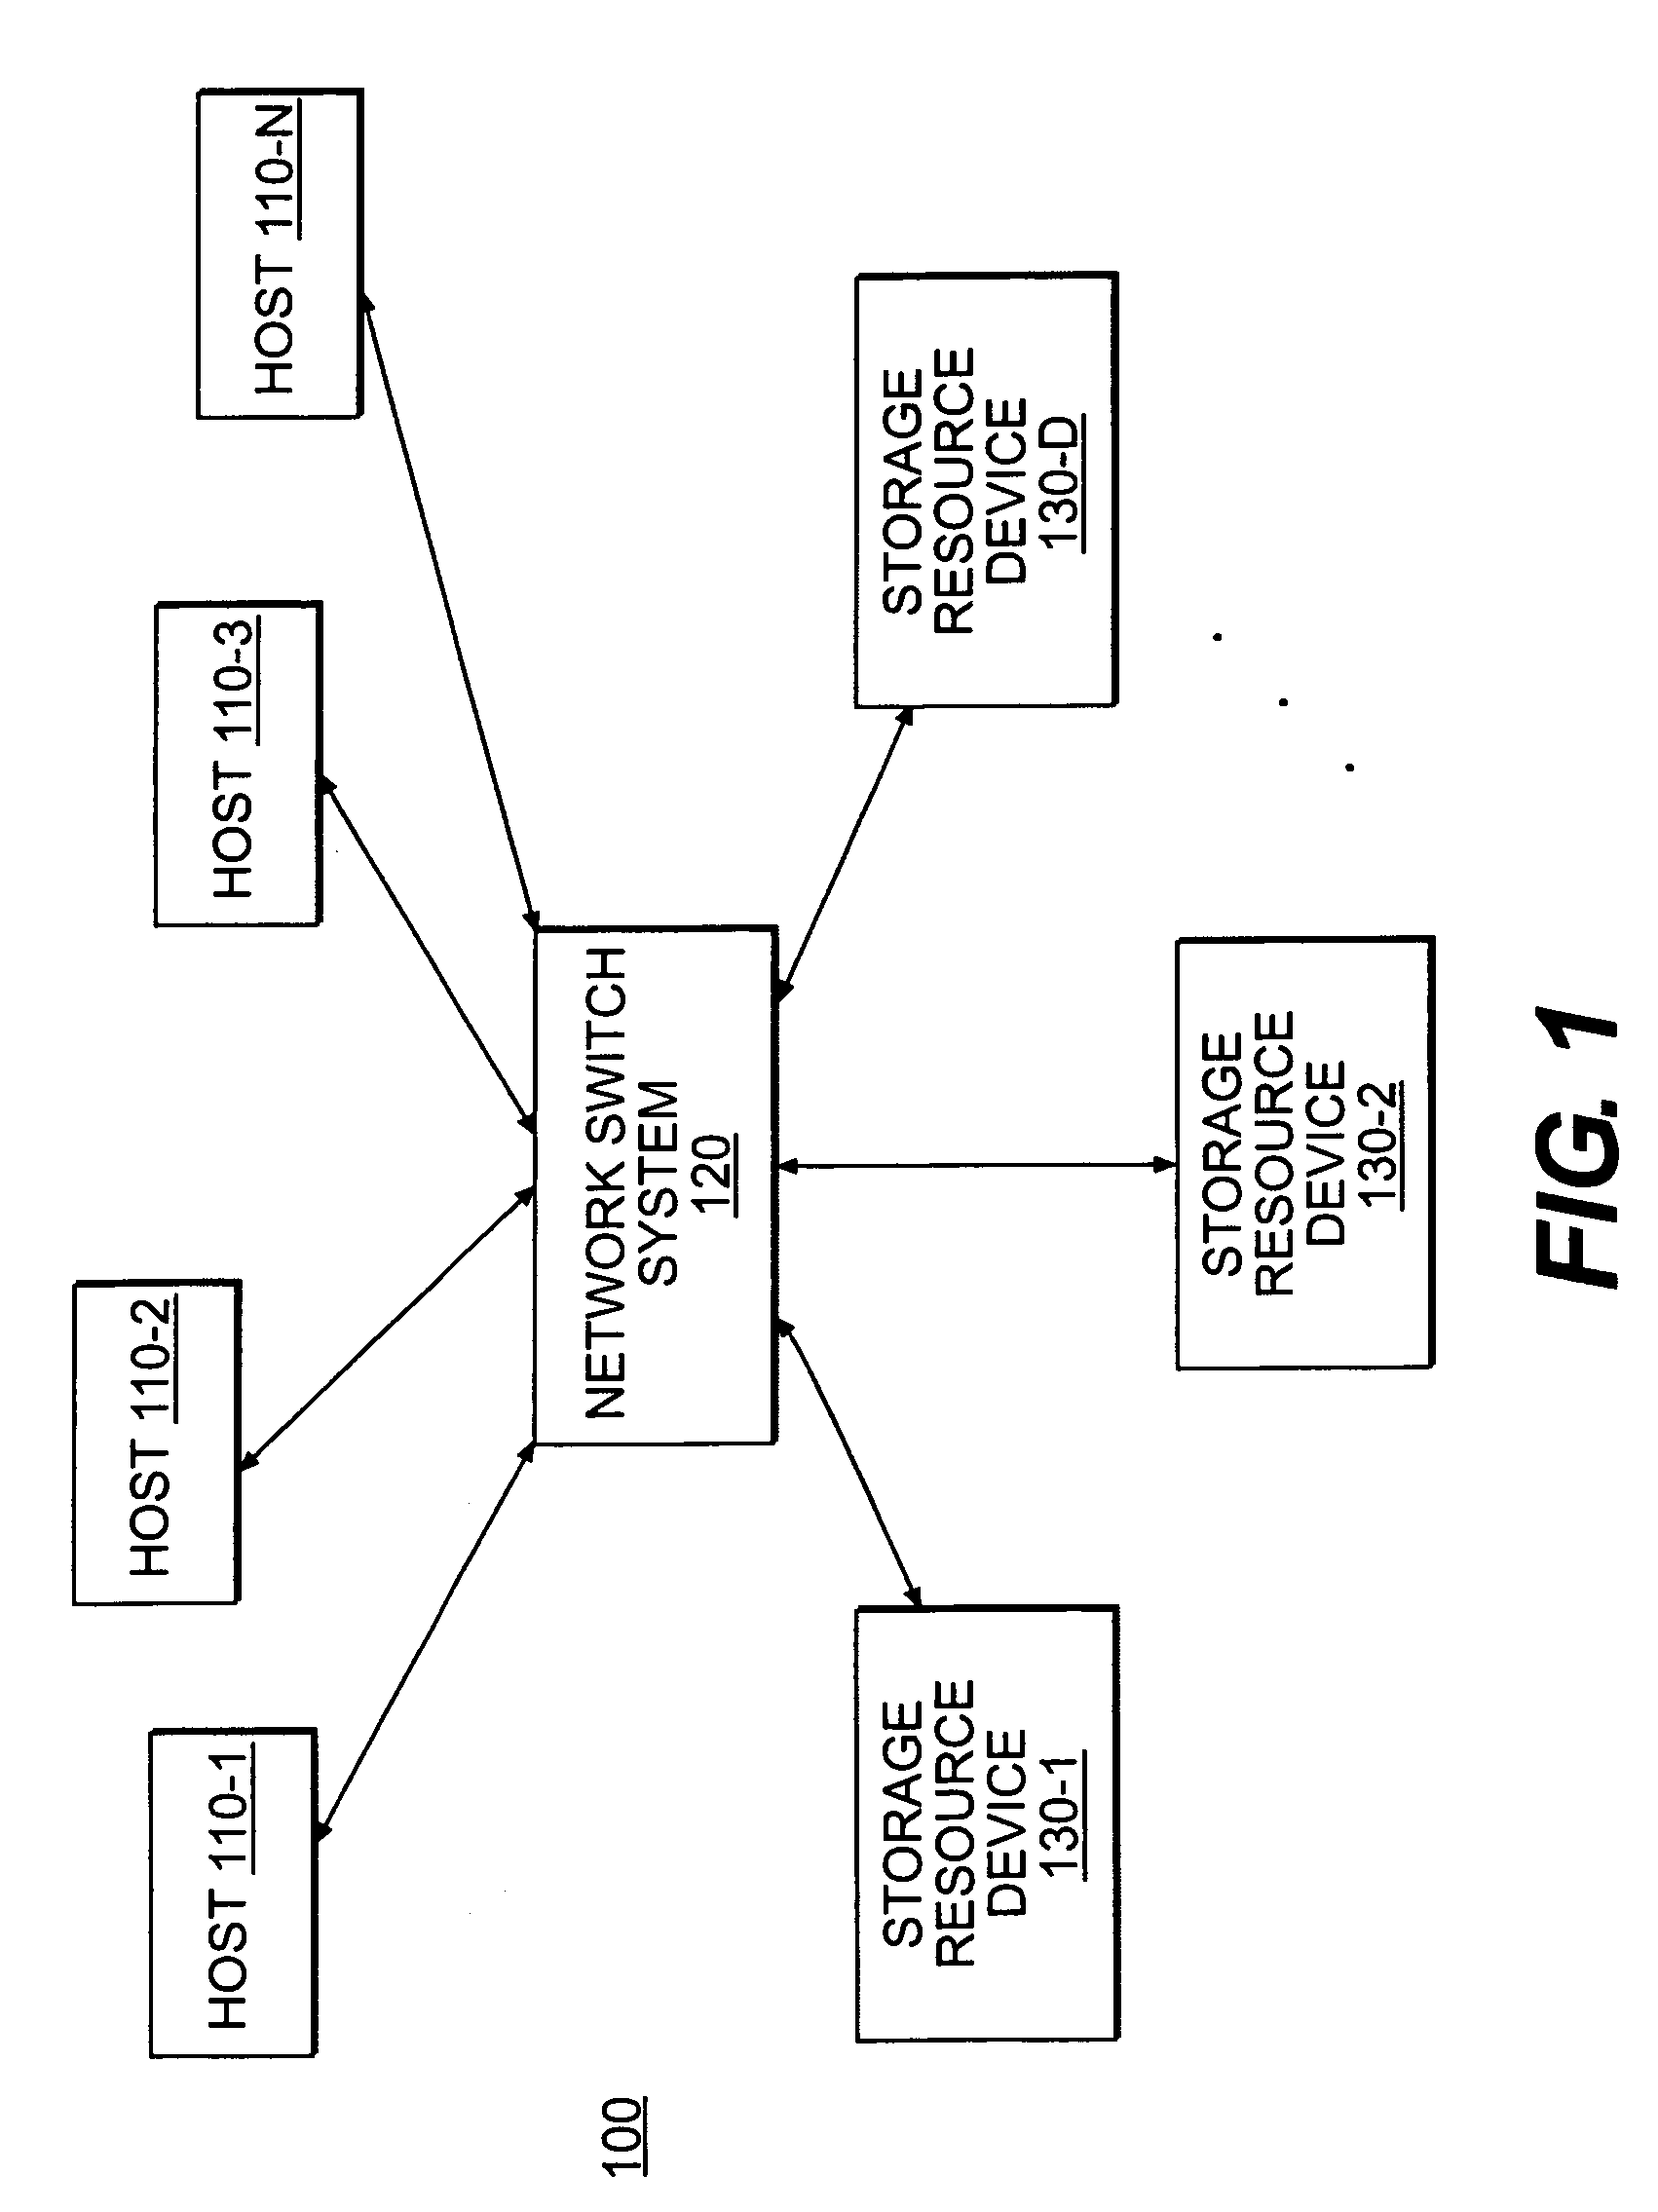 Systems and methods for providing a multi-path network switch system